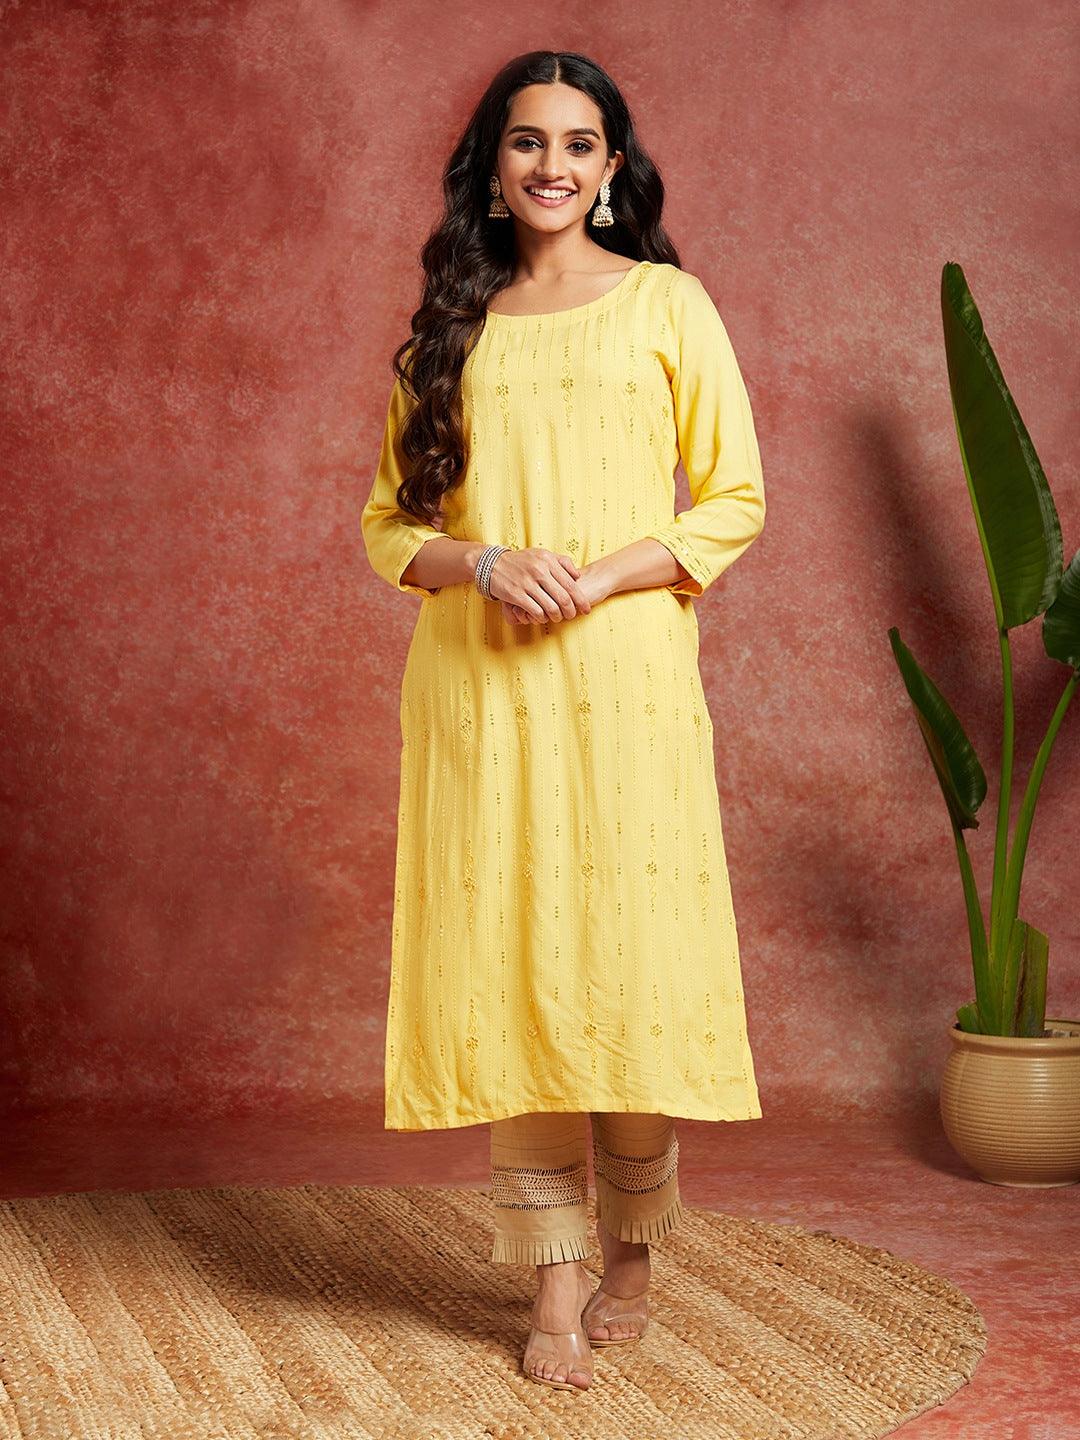 16 Different Ways To Wear Kurtis With Jeans For Women | Kurti with jeans,  Women jeans, Kurti